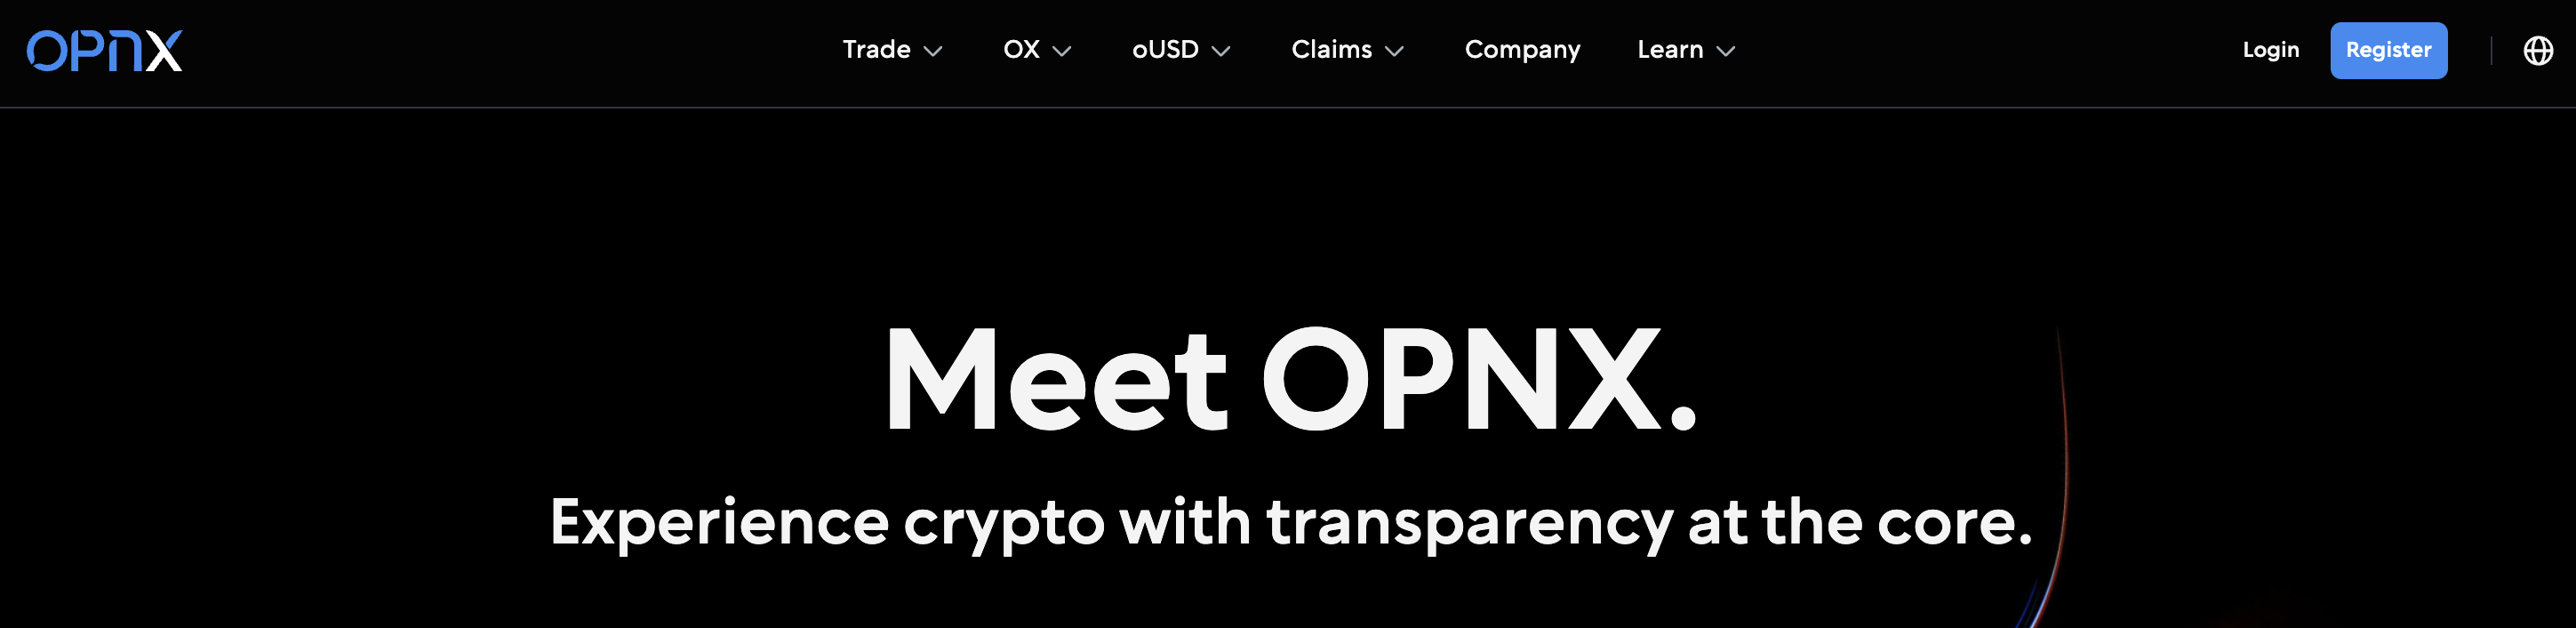 Open Exchange (OPNX) official website landing page